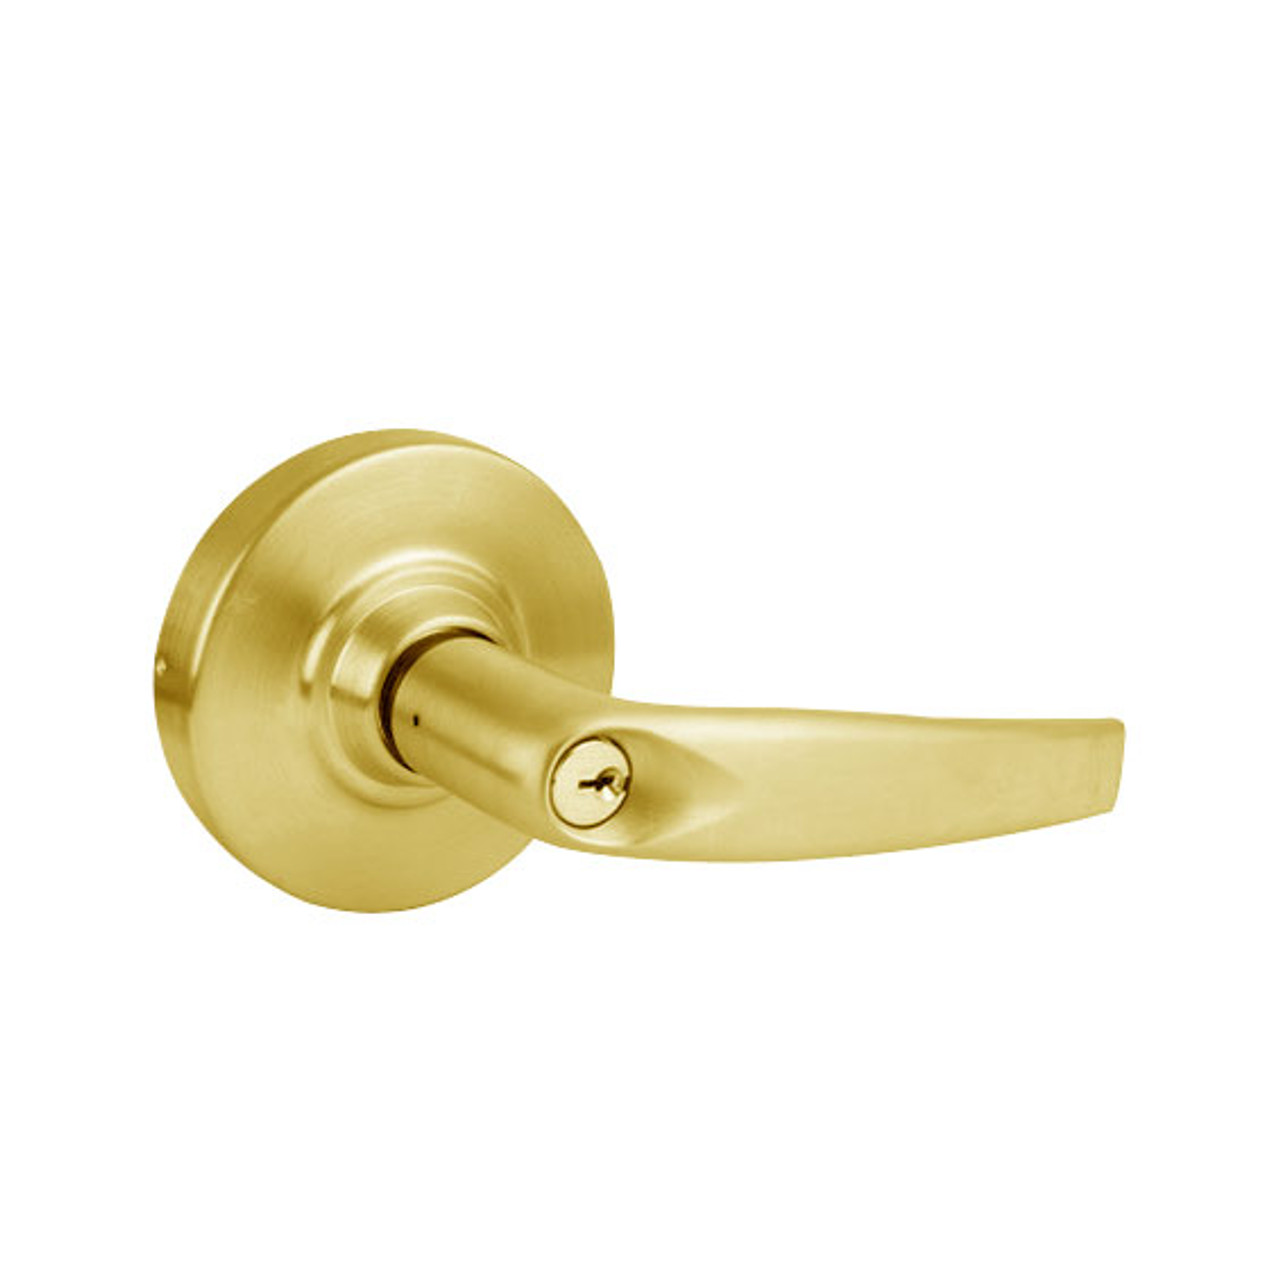 ND70PD-ATH-605 Schlage Athens Cylindrical Lock in Bright Brass